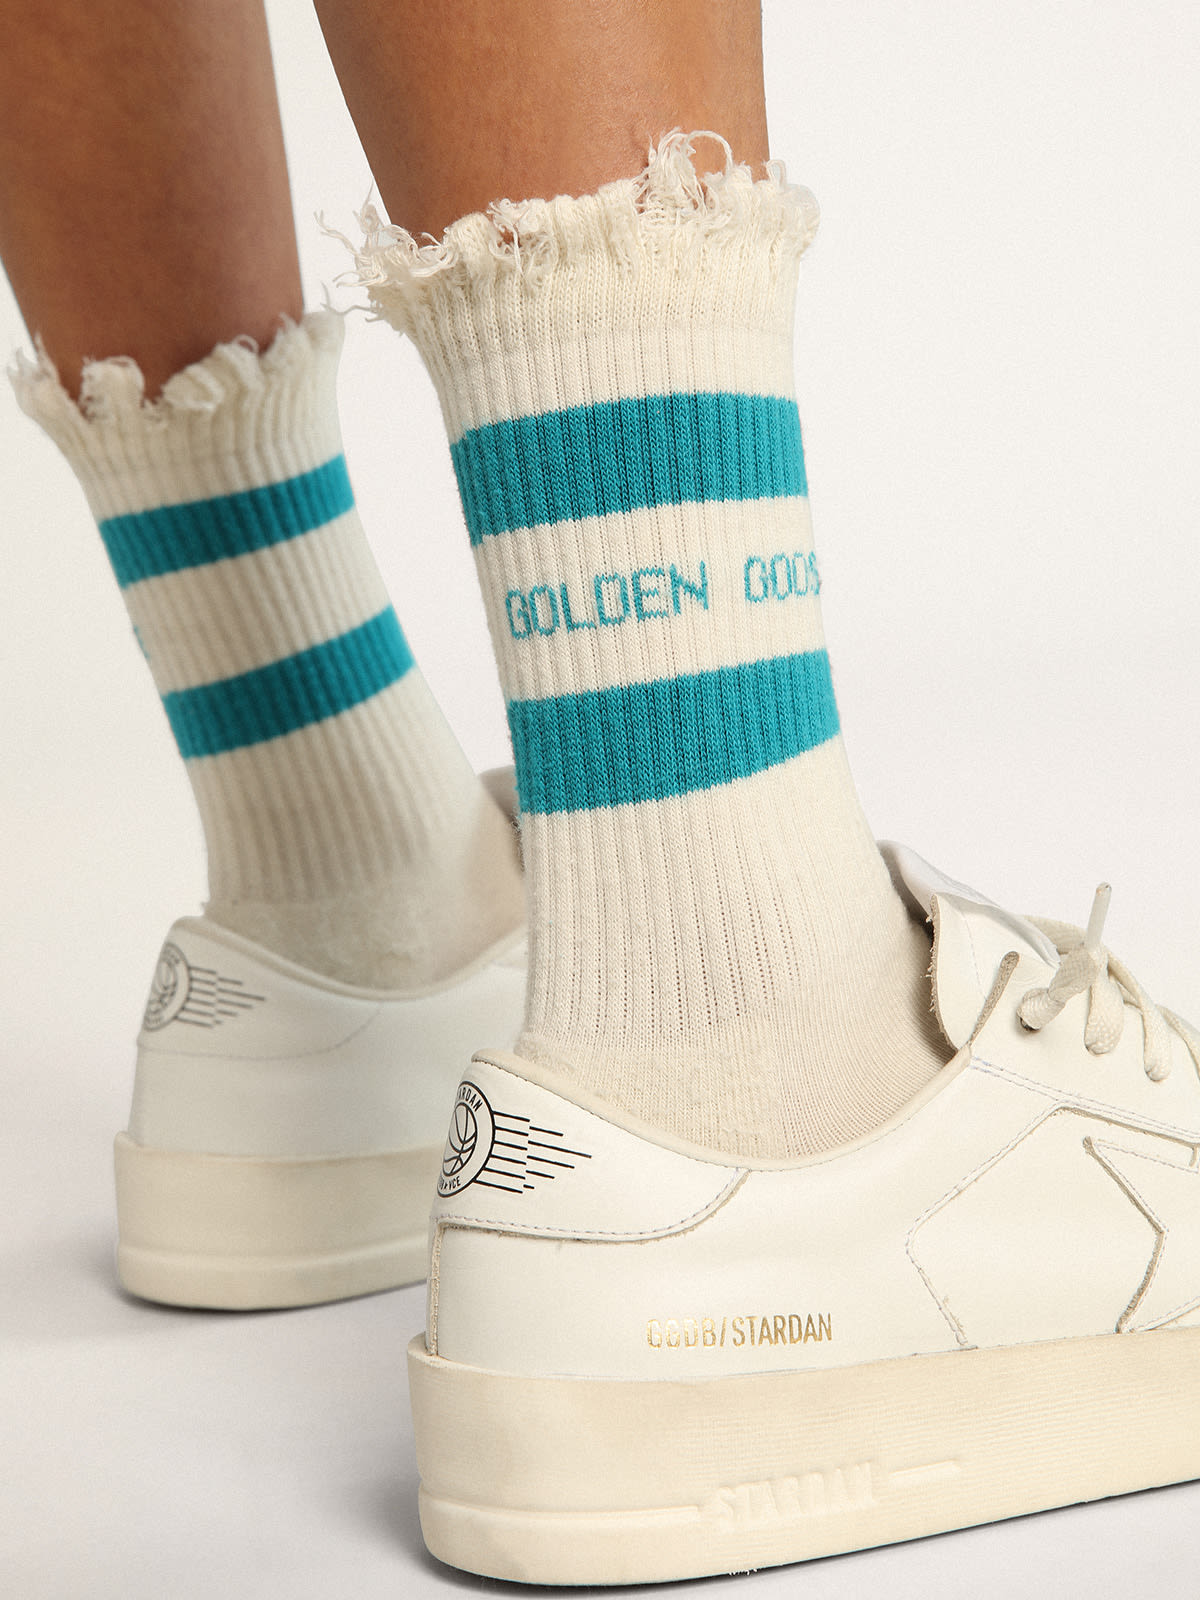 Golden Goose - Distressed-finish white socks with turquoise logo and stripes in 